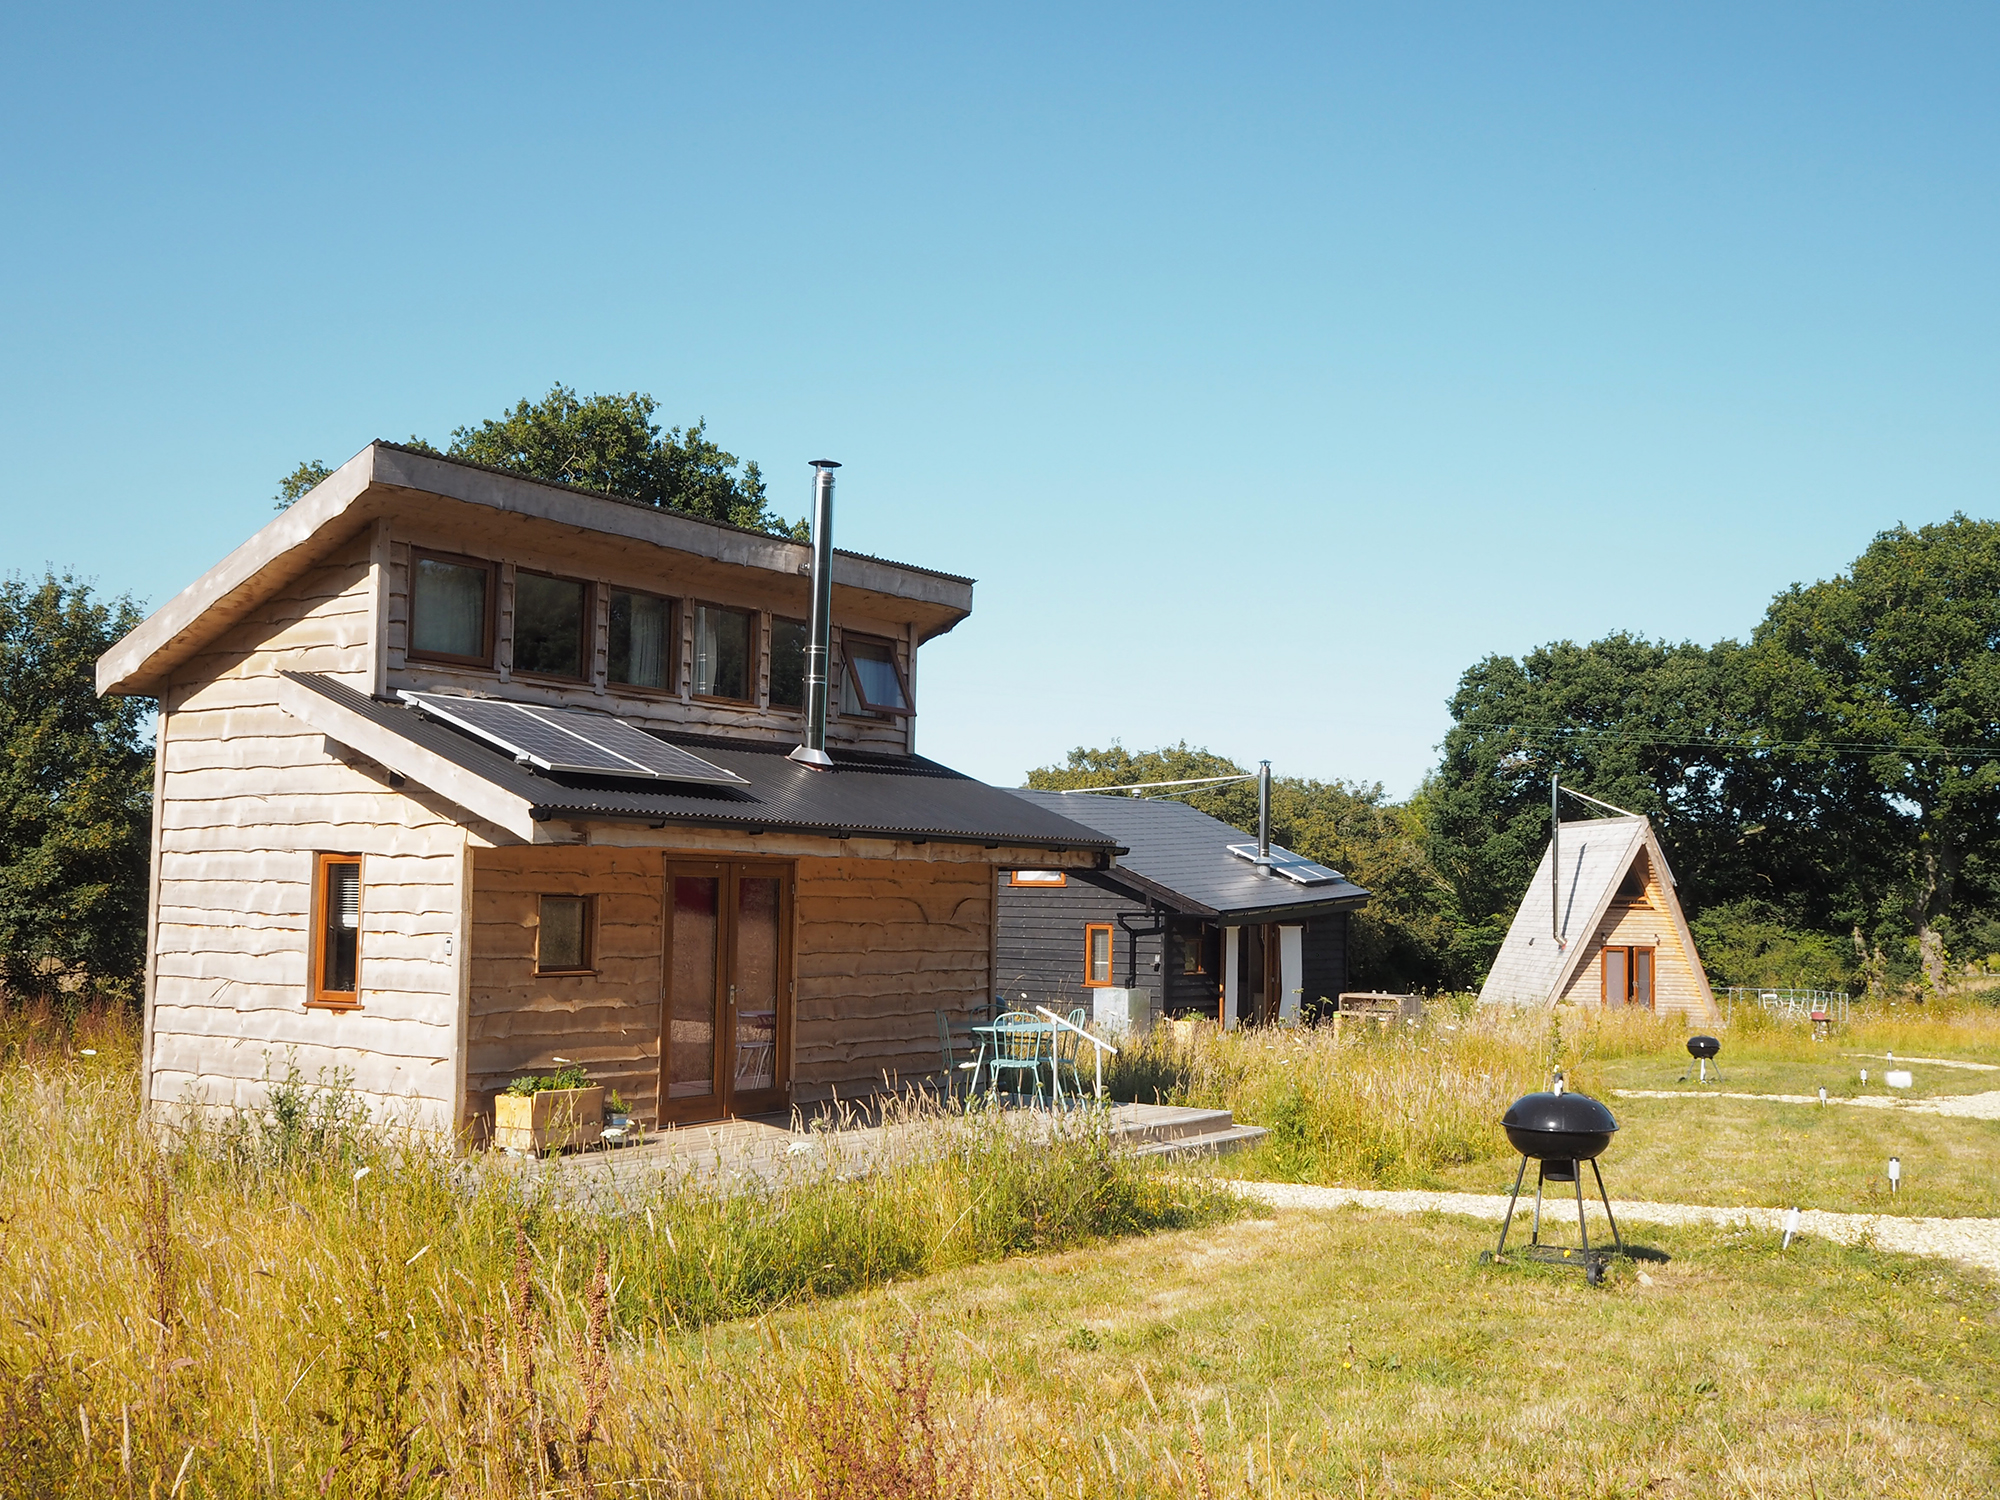 Tiny Homes Holidays - sustainable cabins on the Isle of Wight